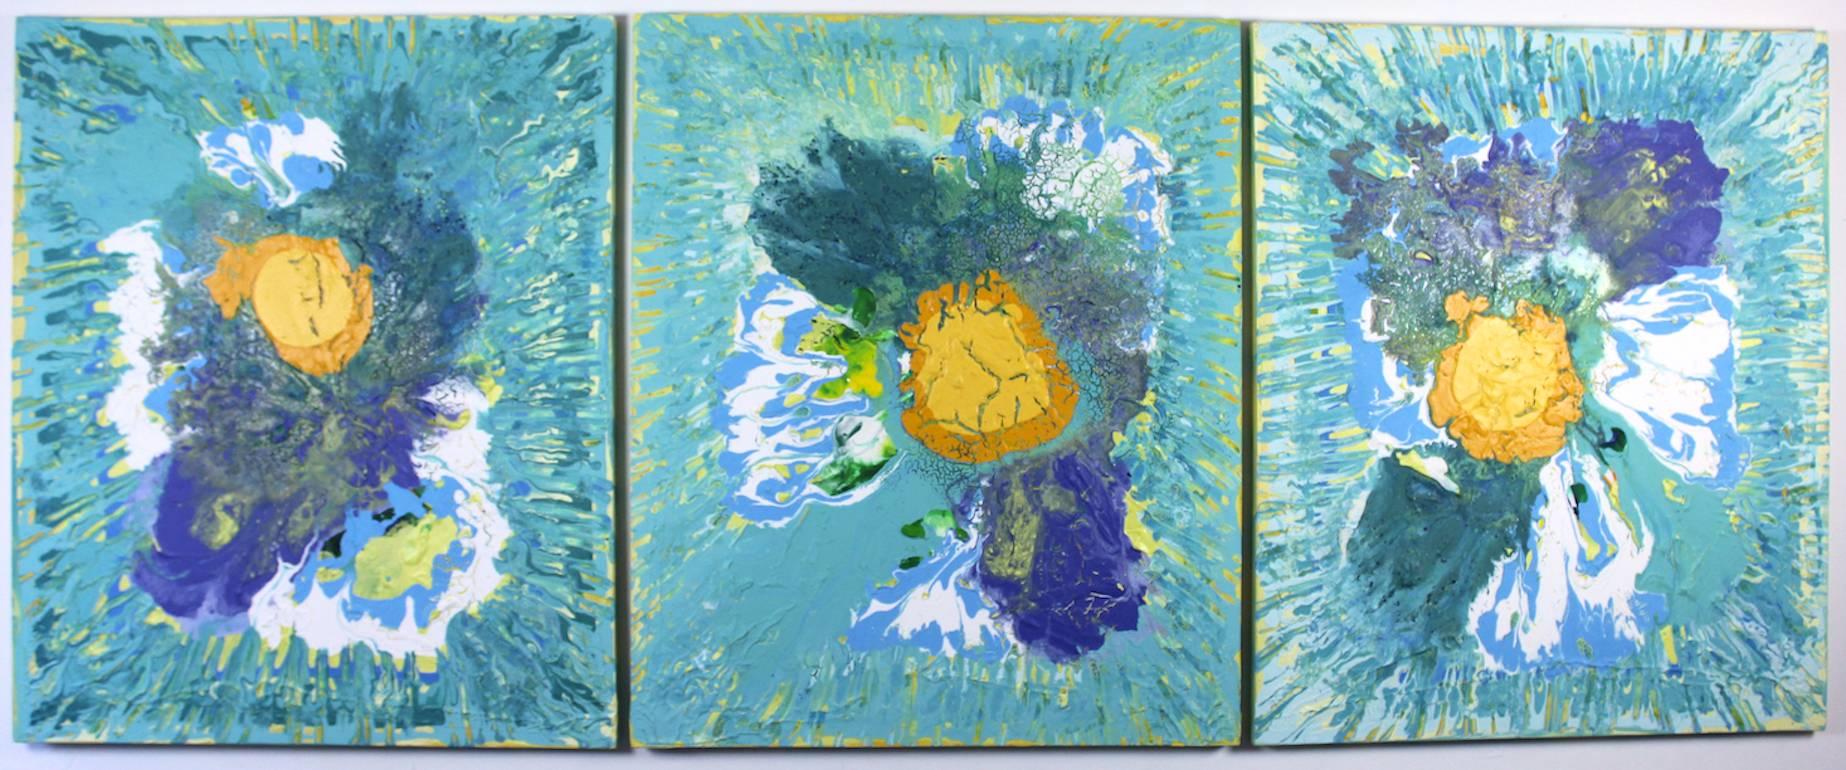 Harry van Gestel Abstract Painting - #63 Triptych, three paintings, Dutch contemporary, green, yellow, purple